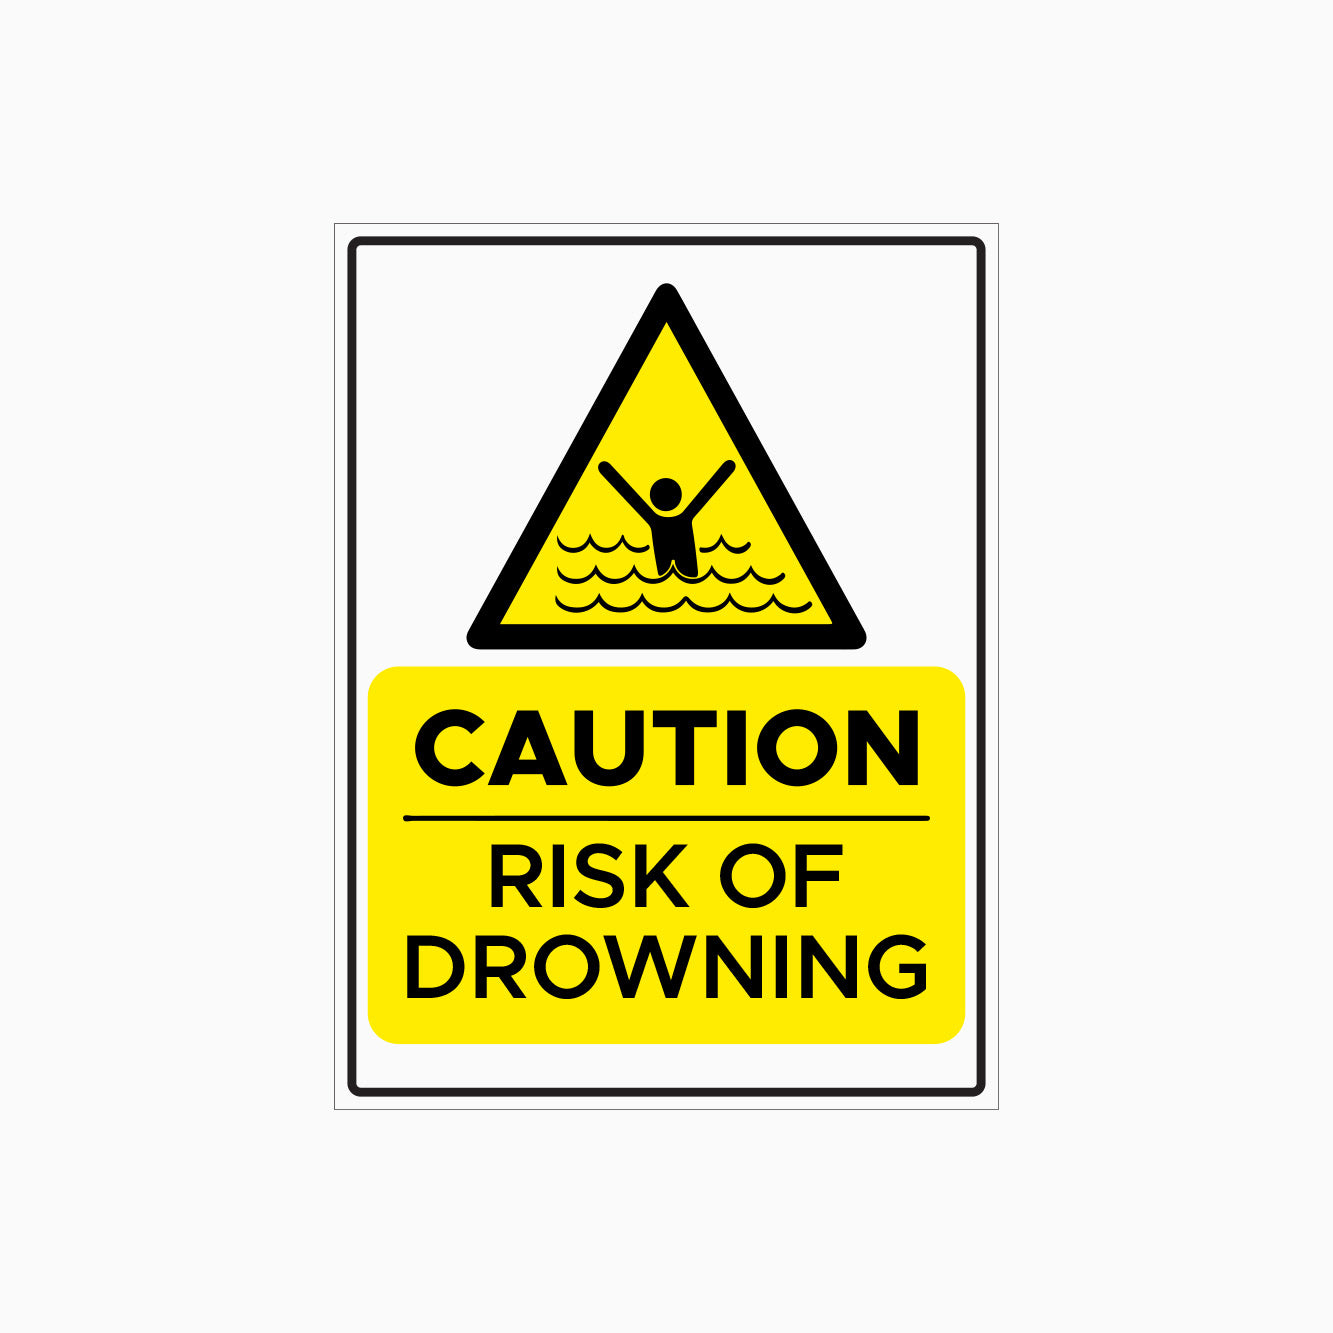 CAUTION SIGN - RISK OF DROWNING SIGN 